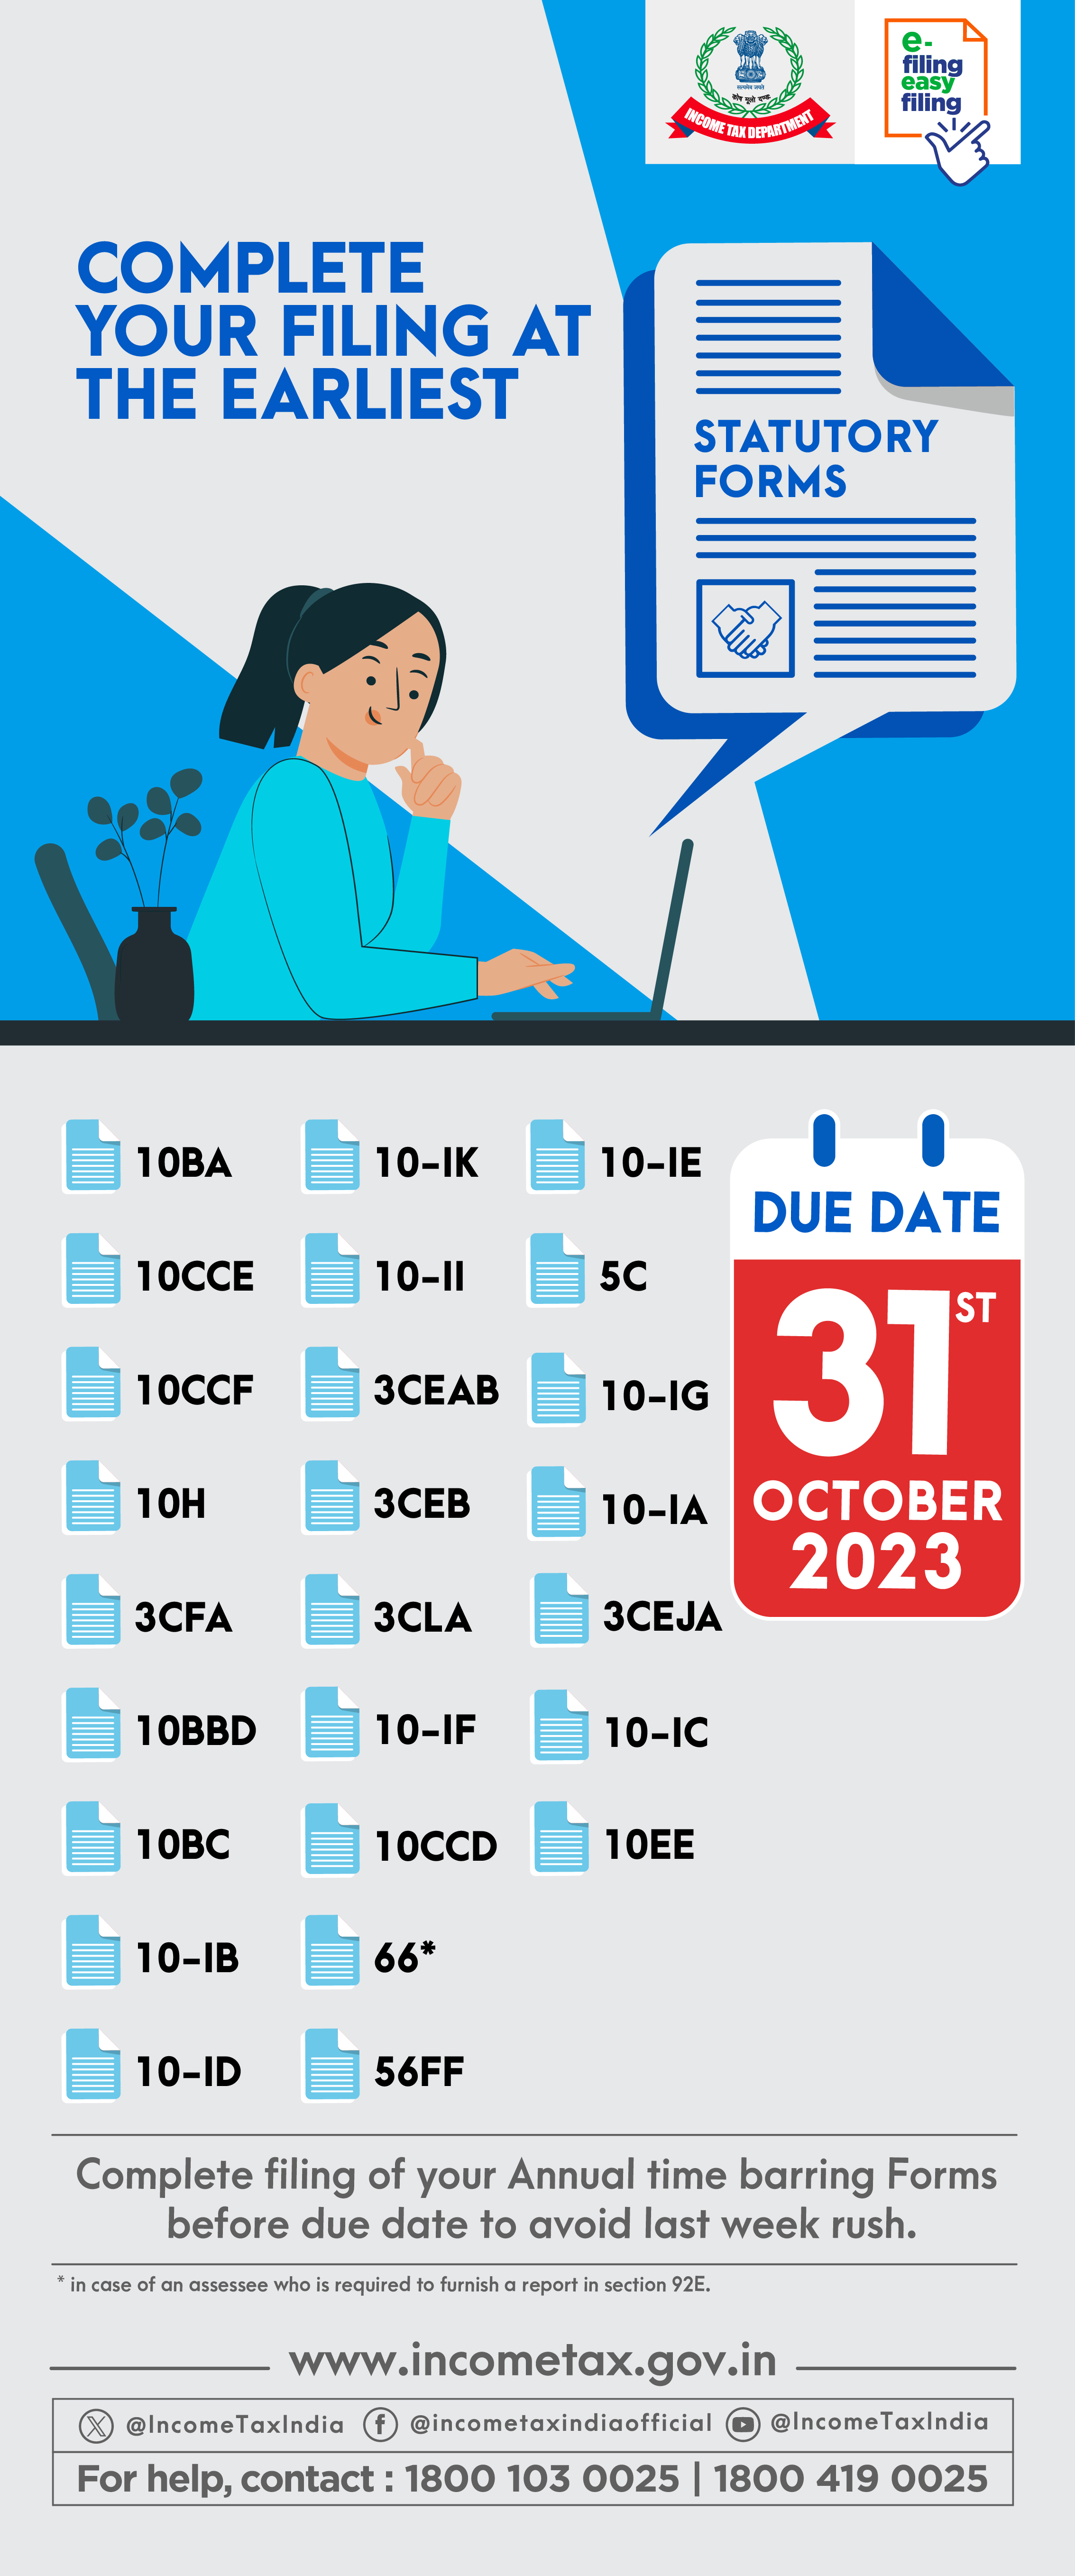 Complete your annual filing of statutory forms due date by 31-Oct-2023